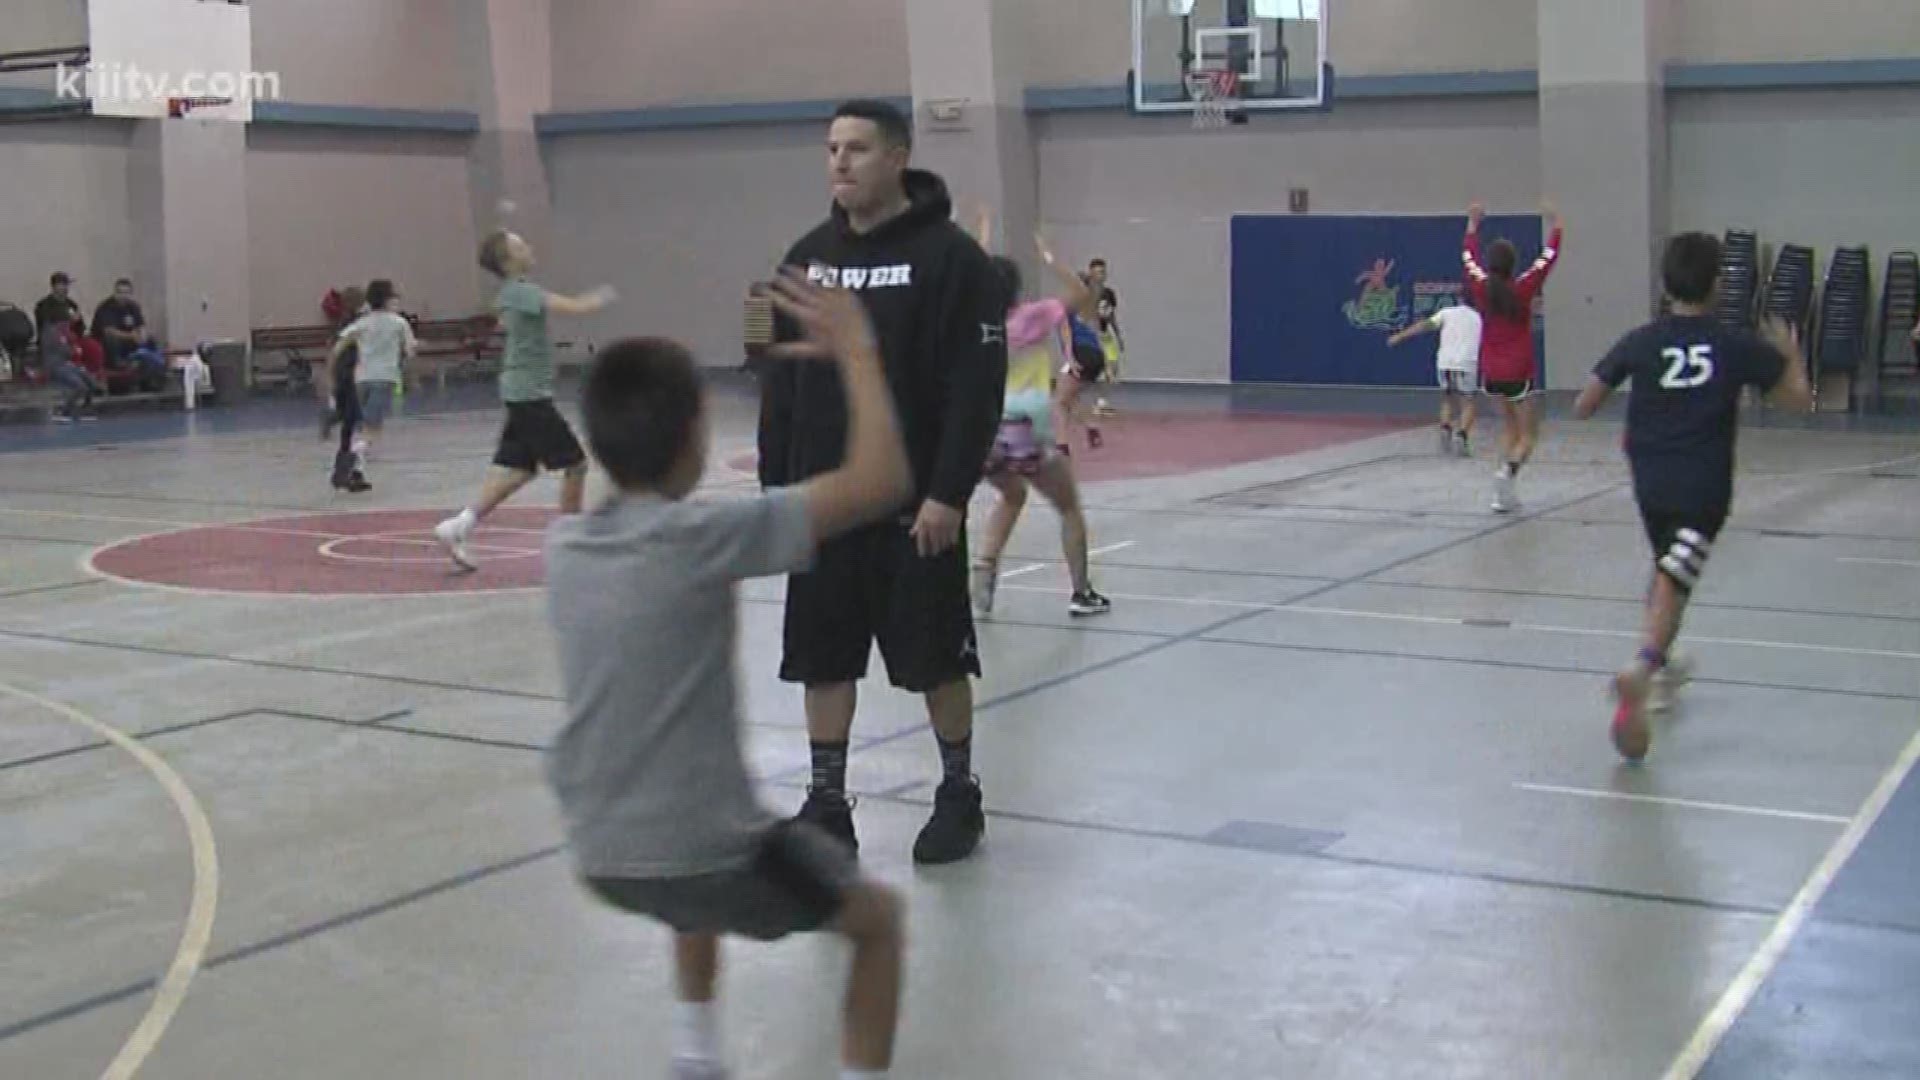 Corpus Christi's Parks & Recreation Department is hoping to make sure kids stay active over Christmas break, so they're hosting a Youth Basketball Camp on Dec. 26.